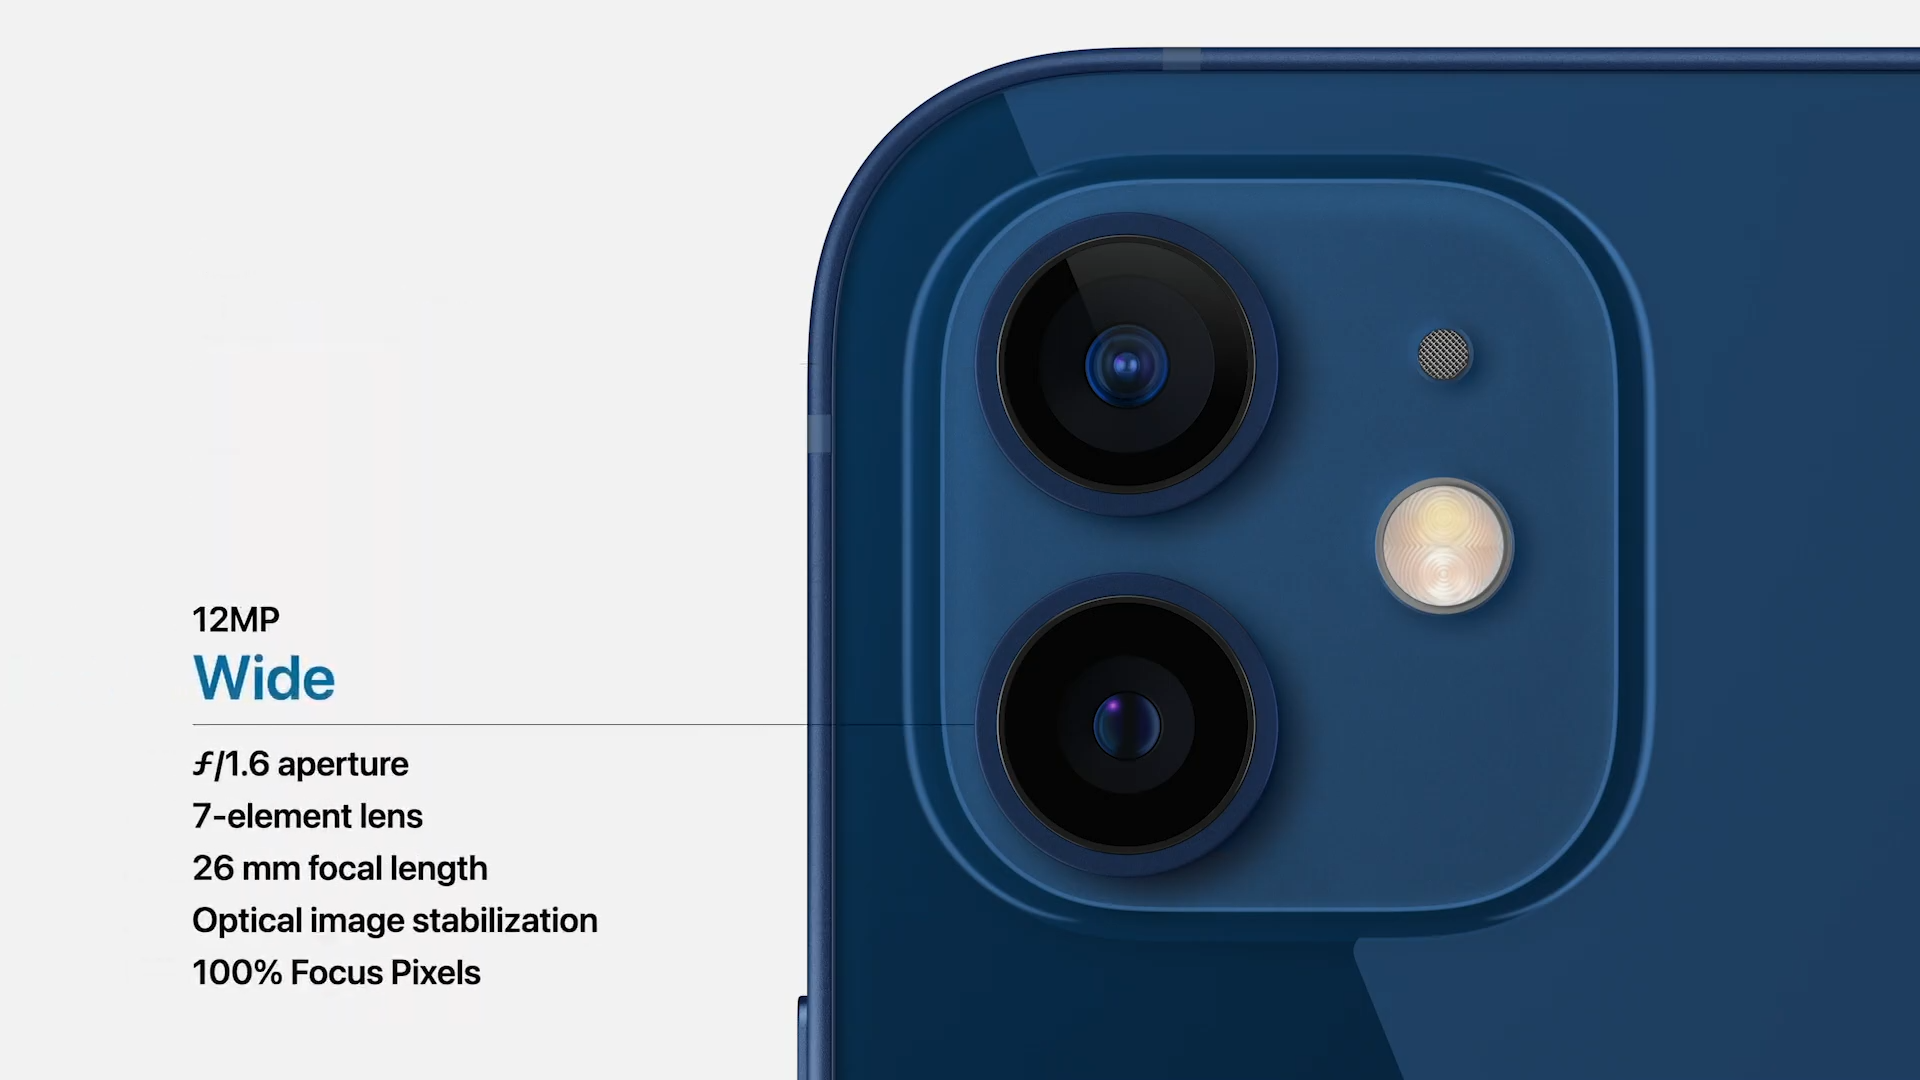 iPhone 12 mini new ultrawide angle camera - The Apple iPhone 12 mini lands the smallest price, 5G, and a late release date